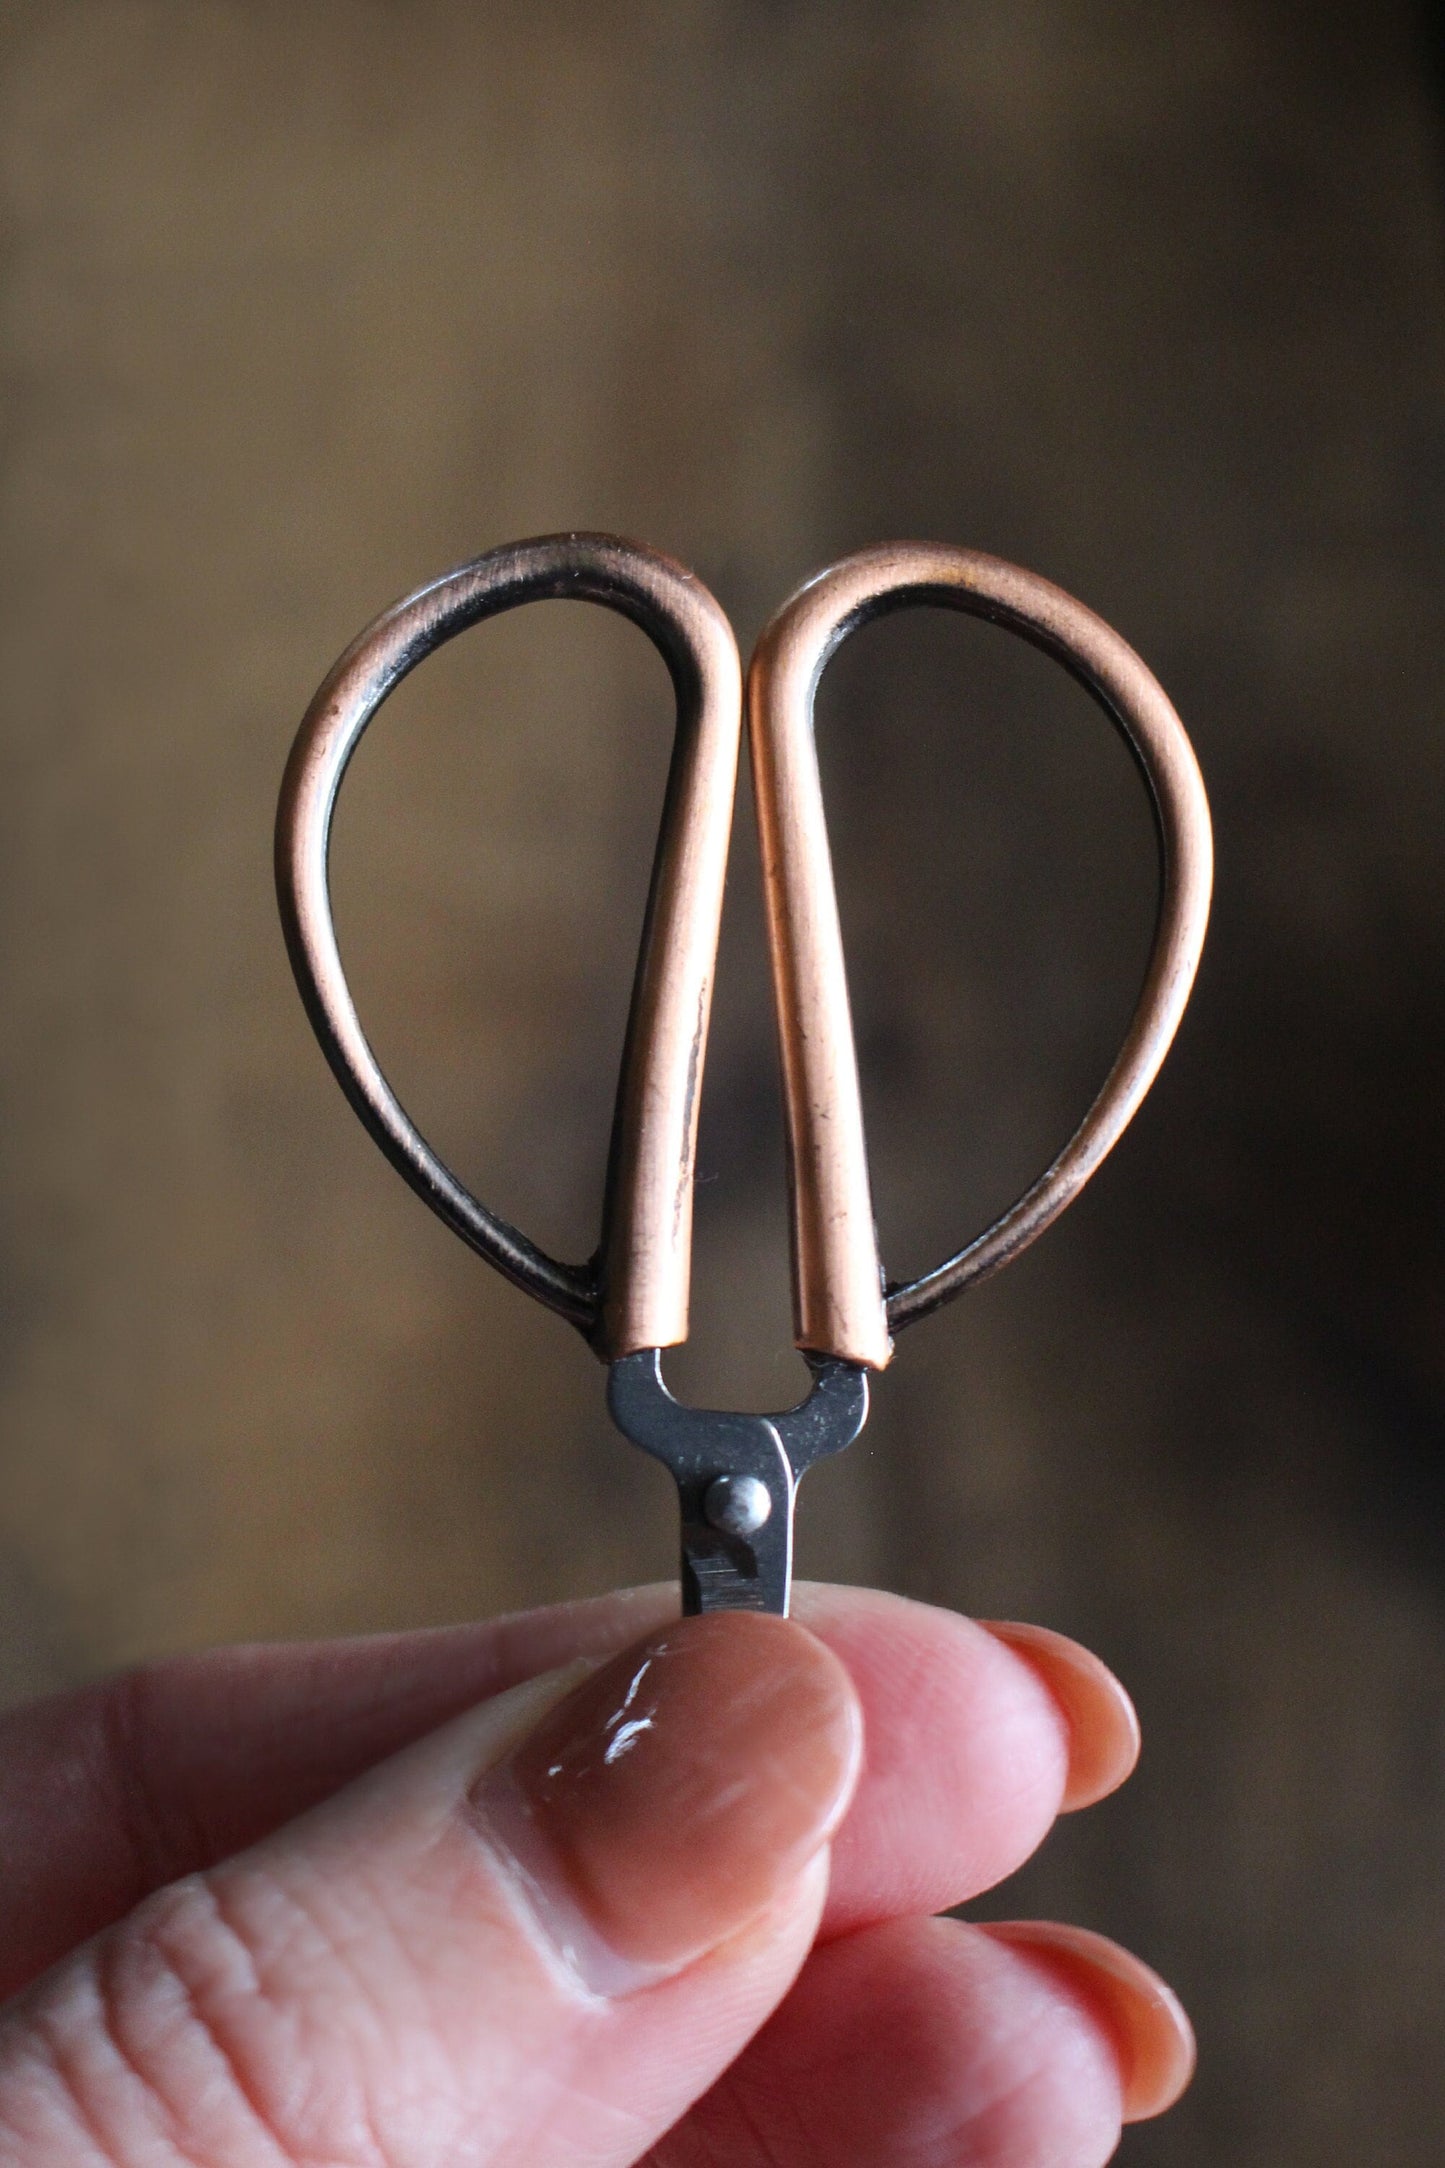 Mini Bonsai Snips • Minimalist Thread Snips in Antique Copper or Silver • Perfect Gift for Moms and Grandmothers That Sew